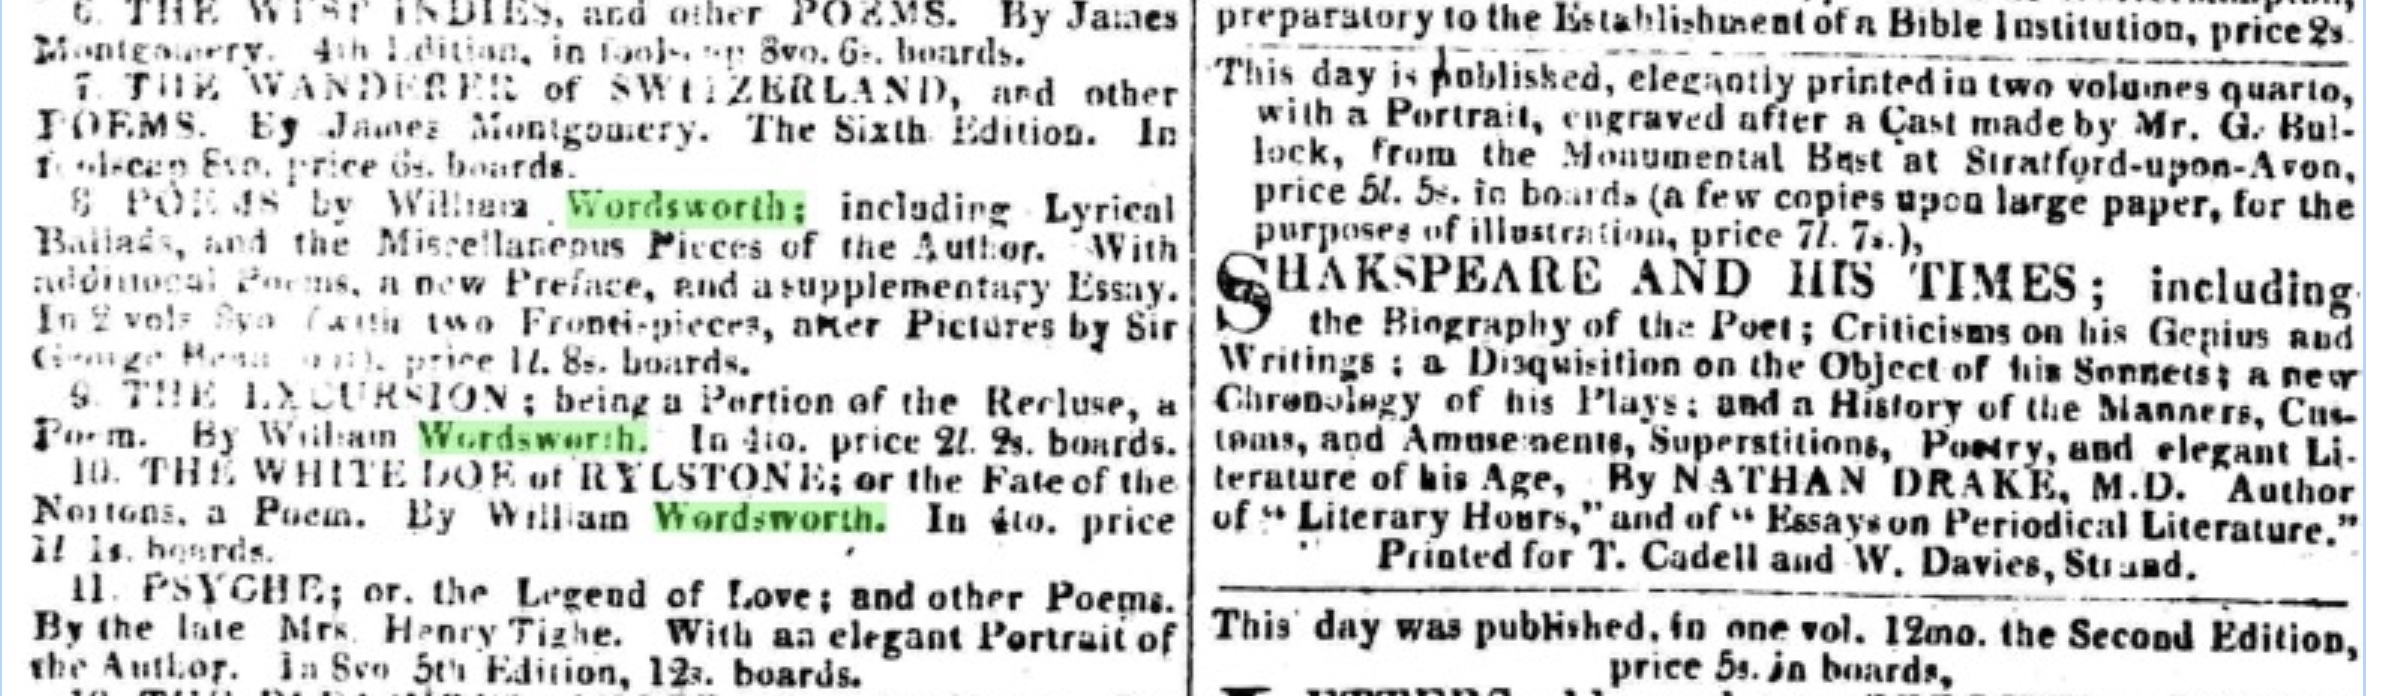  Some of Wordsworth’s poetry advertised in The
          Morning Post (London), Friday, 26 December 1817, just around when Keats is seeing
        Wordsworth. Click to enlarge.